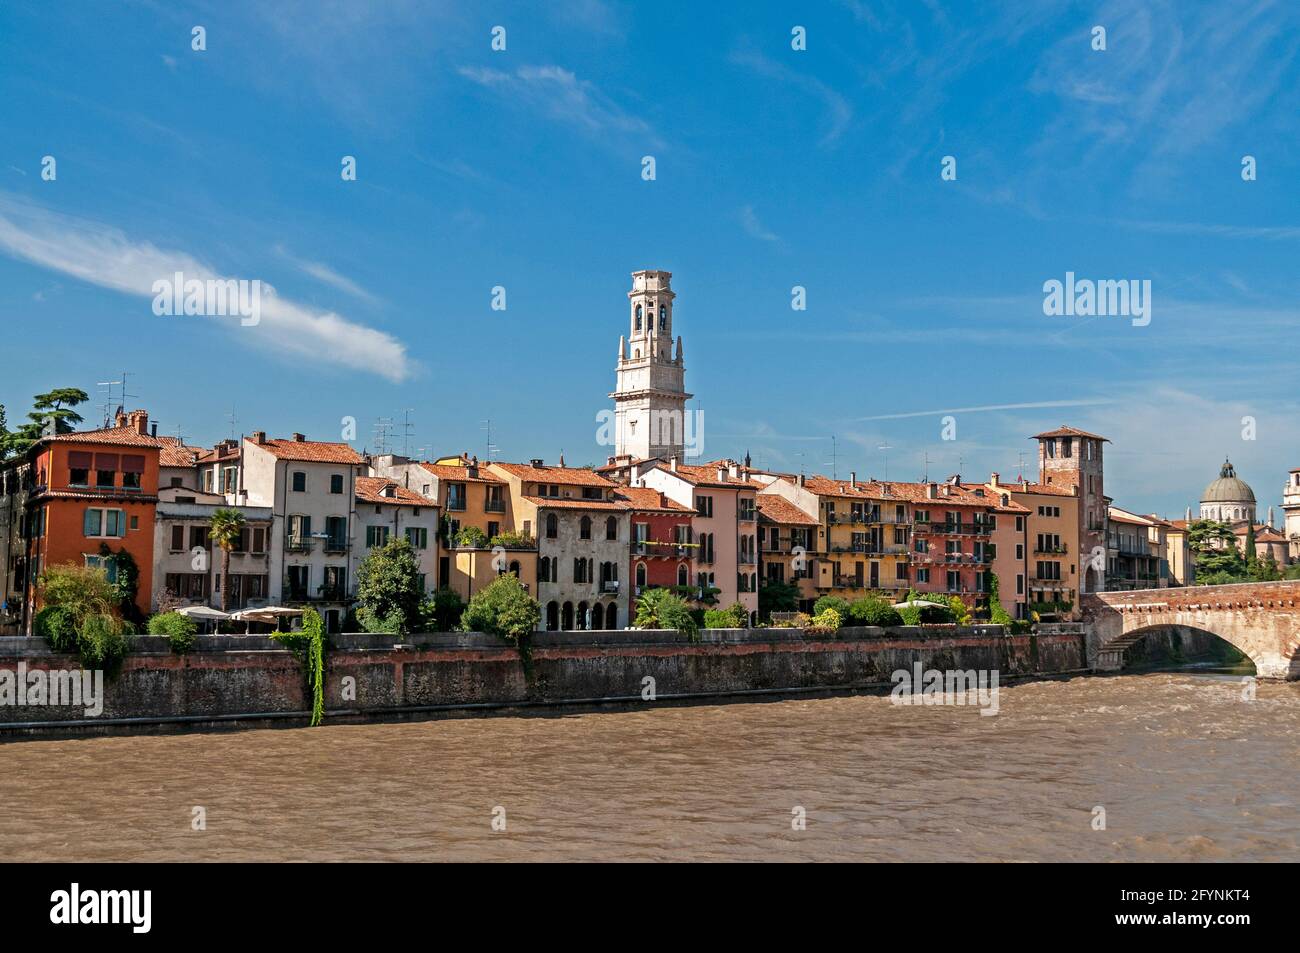 Skyline of the medieval city of Verona on the River Adige, (Fiume Adige) in the Veneto region of northern Italy. Stock Photo